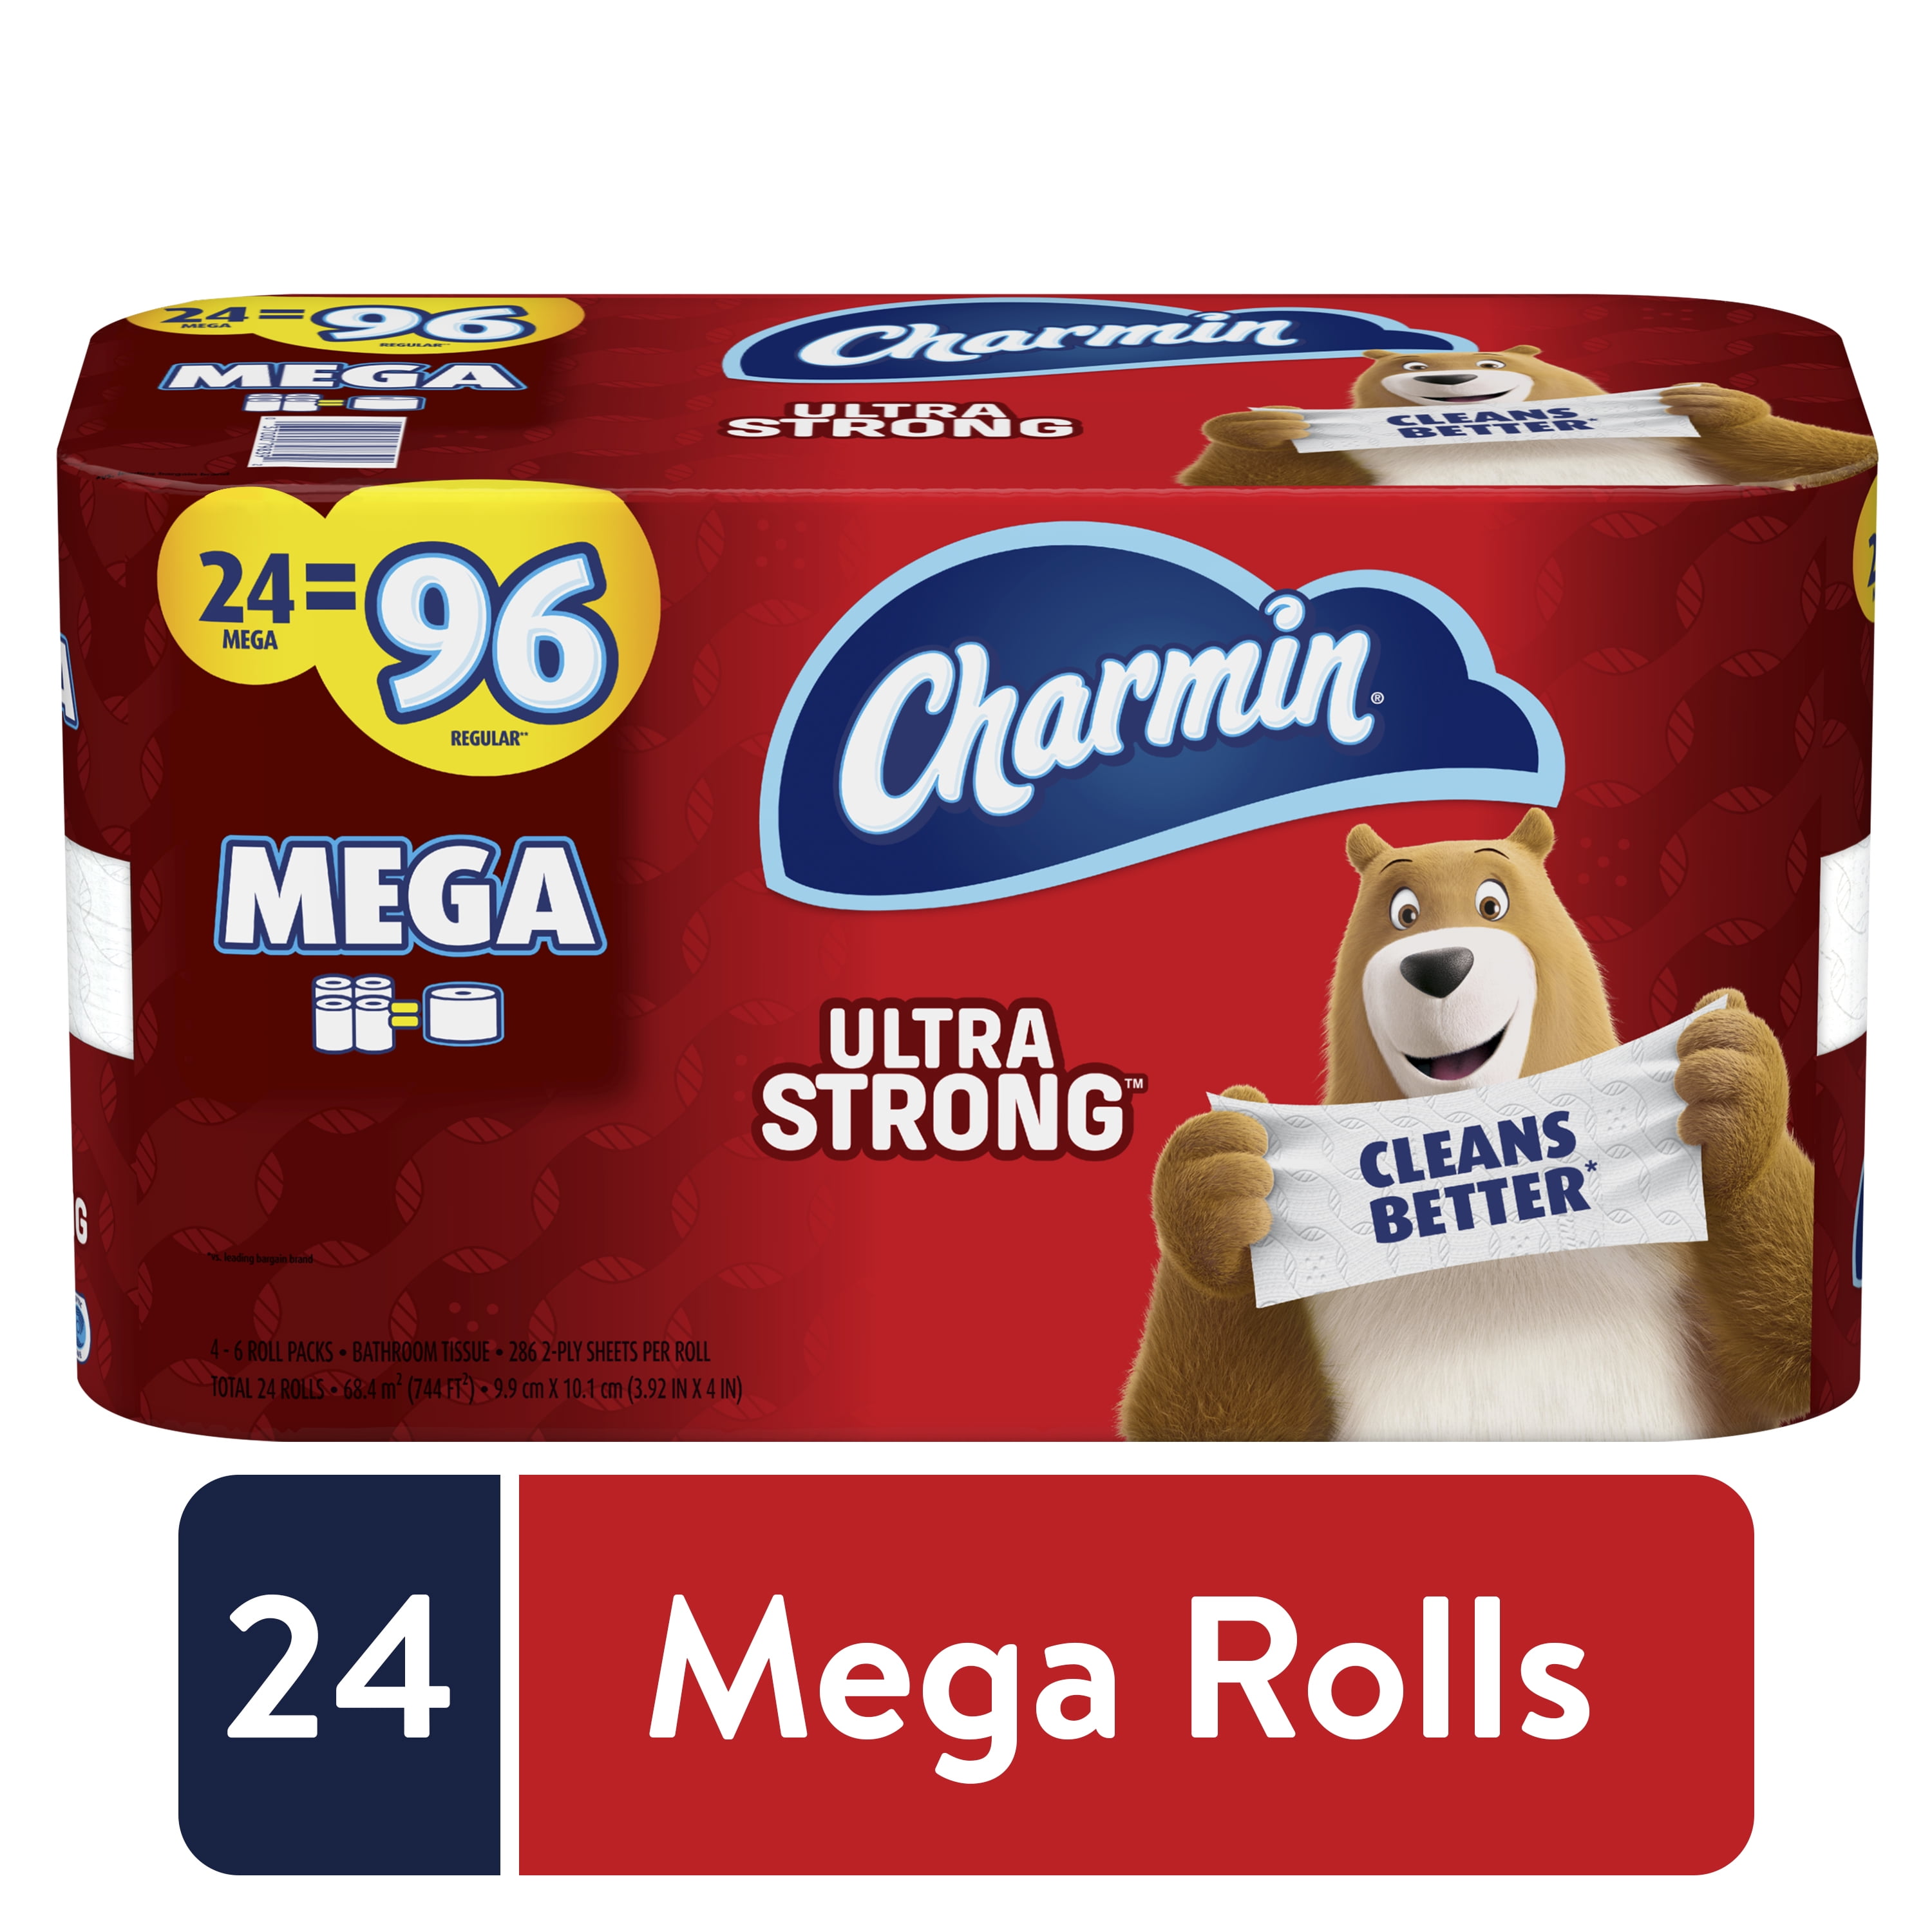 **HOT SALE** CHARMIN ULTRA STRONG Toilet Paper 24-48-72 ROLLS>>>>FREE DELIVERY 